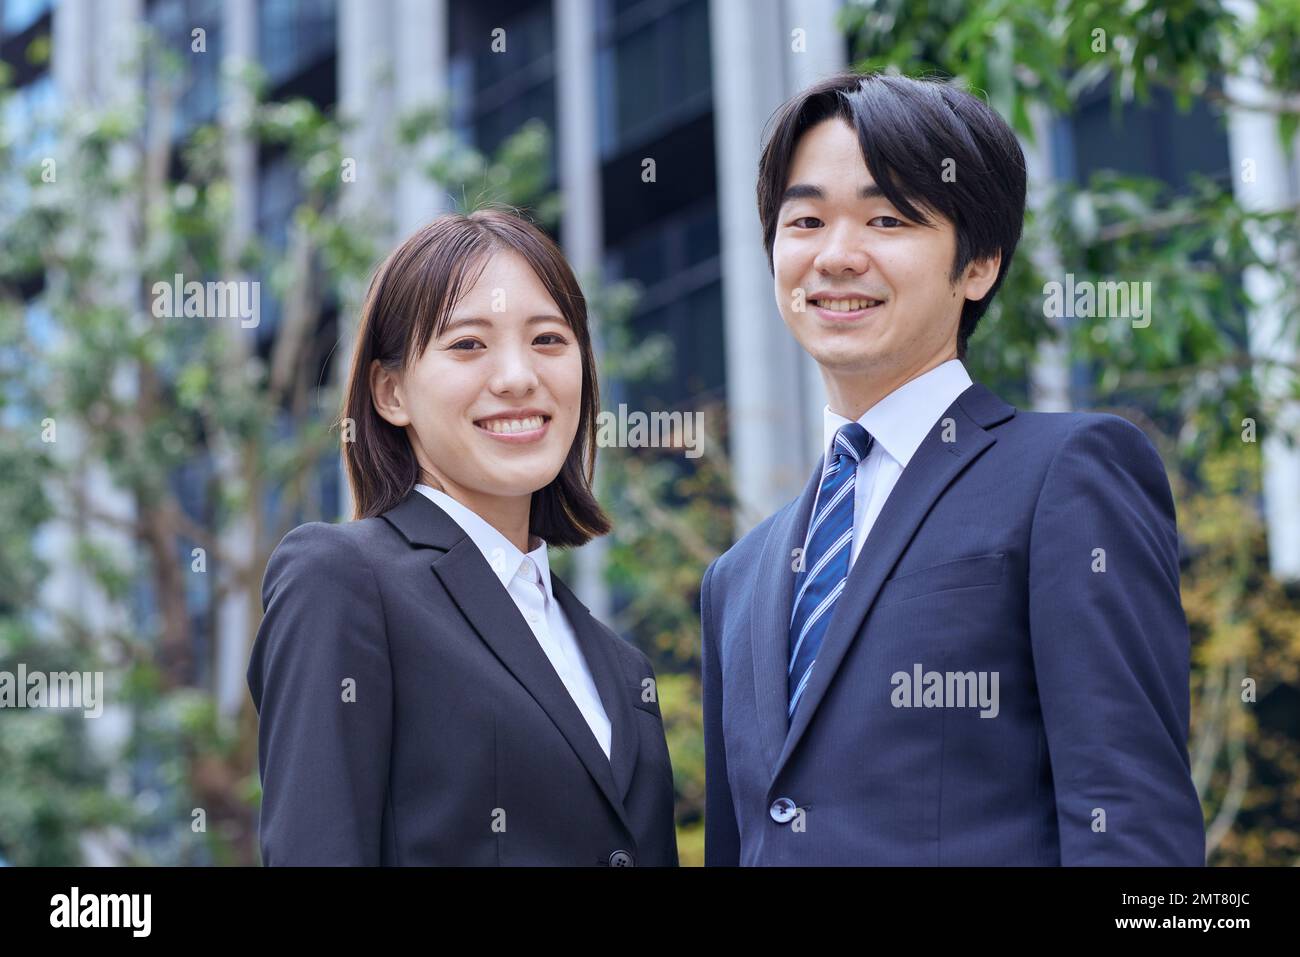 Young Japanese businesspeople portrait Stock Photo